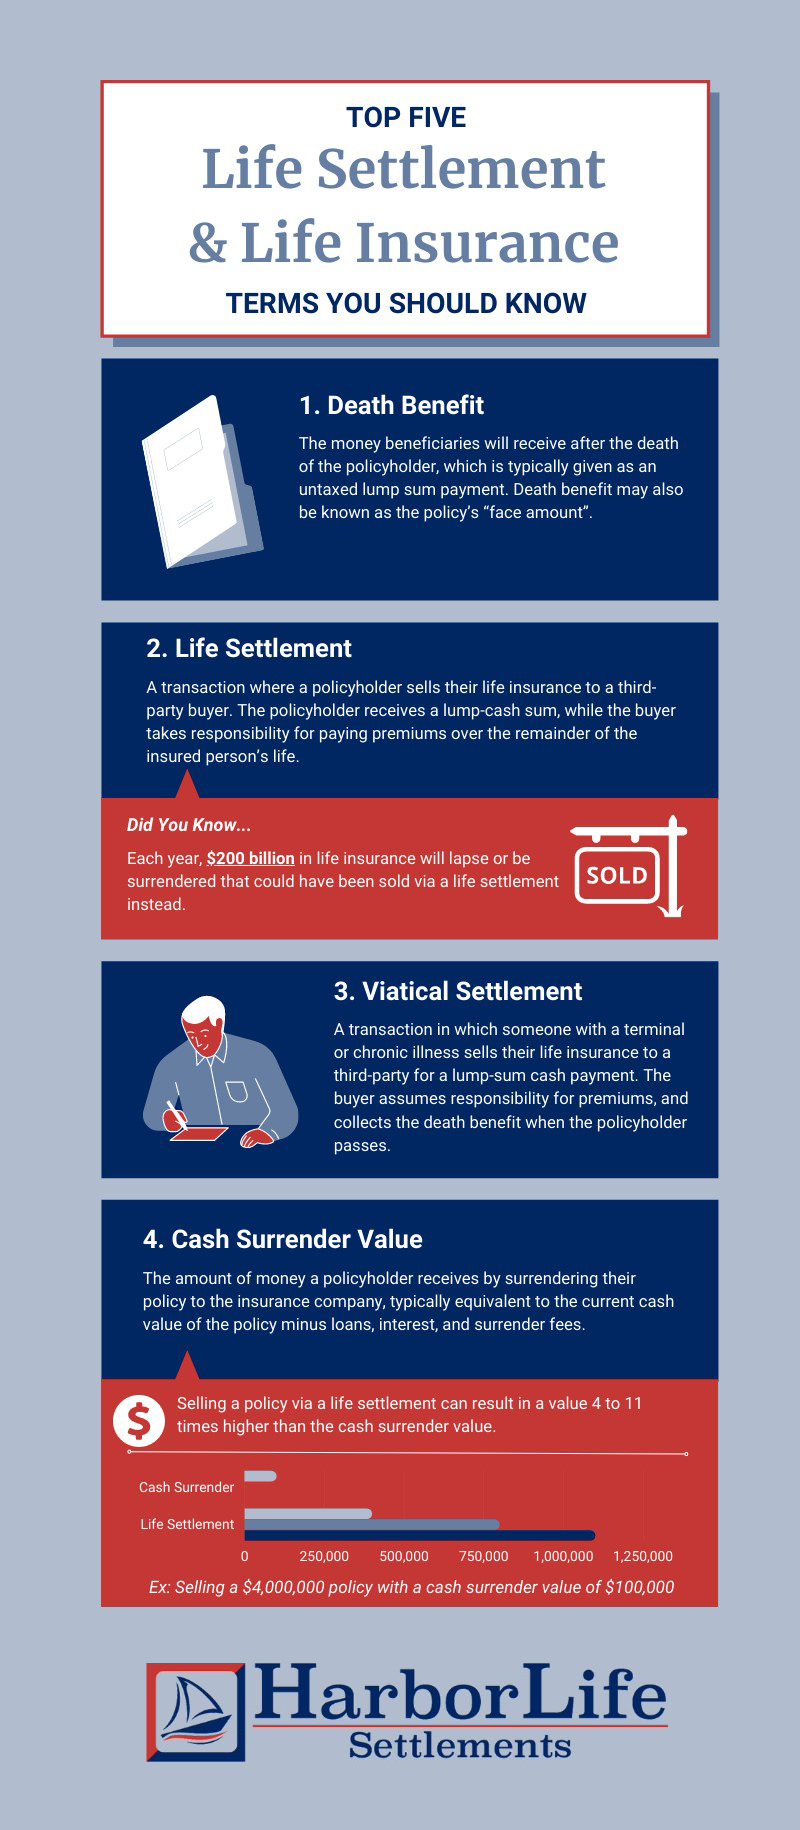 Life Insurance and Life Settlement Glossary Infographic